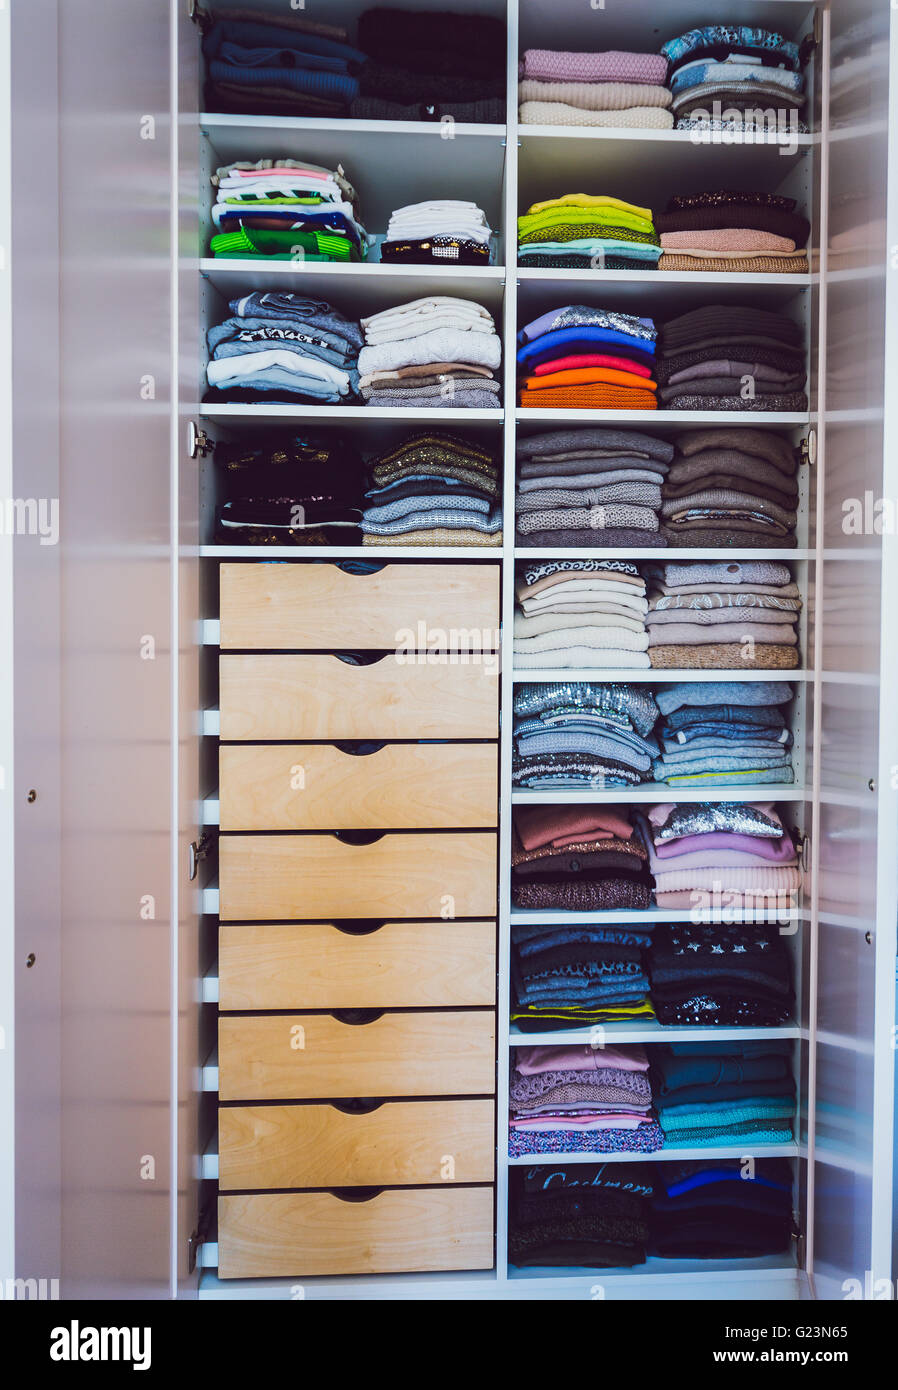 wardrobe with colorful clothes Stock Photo